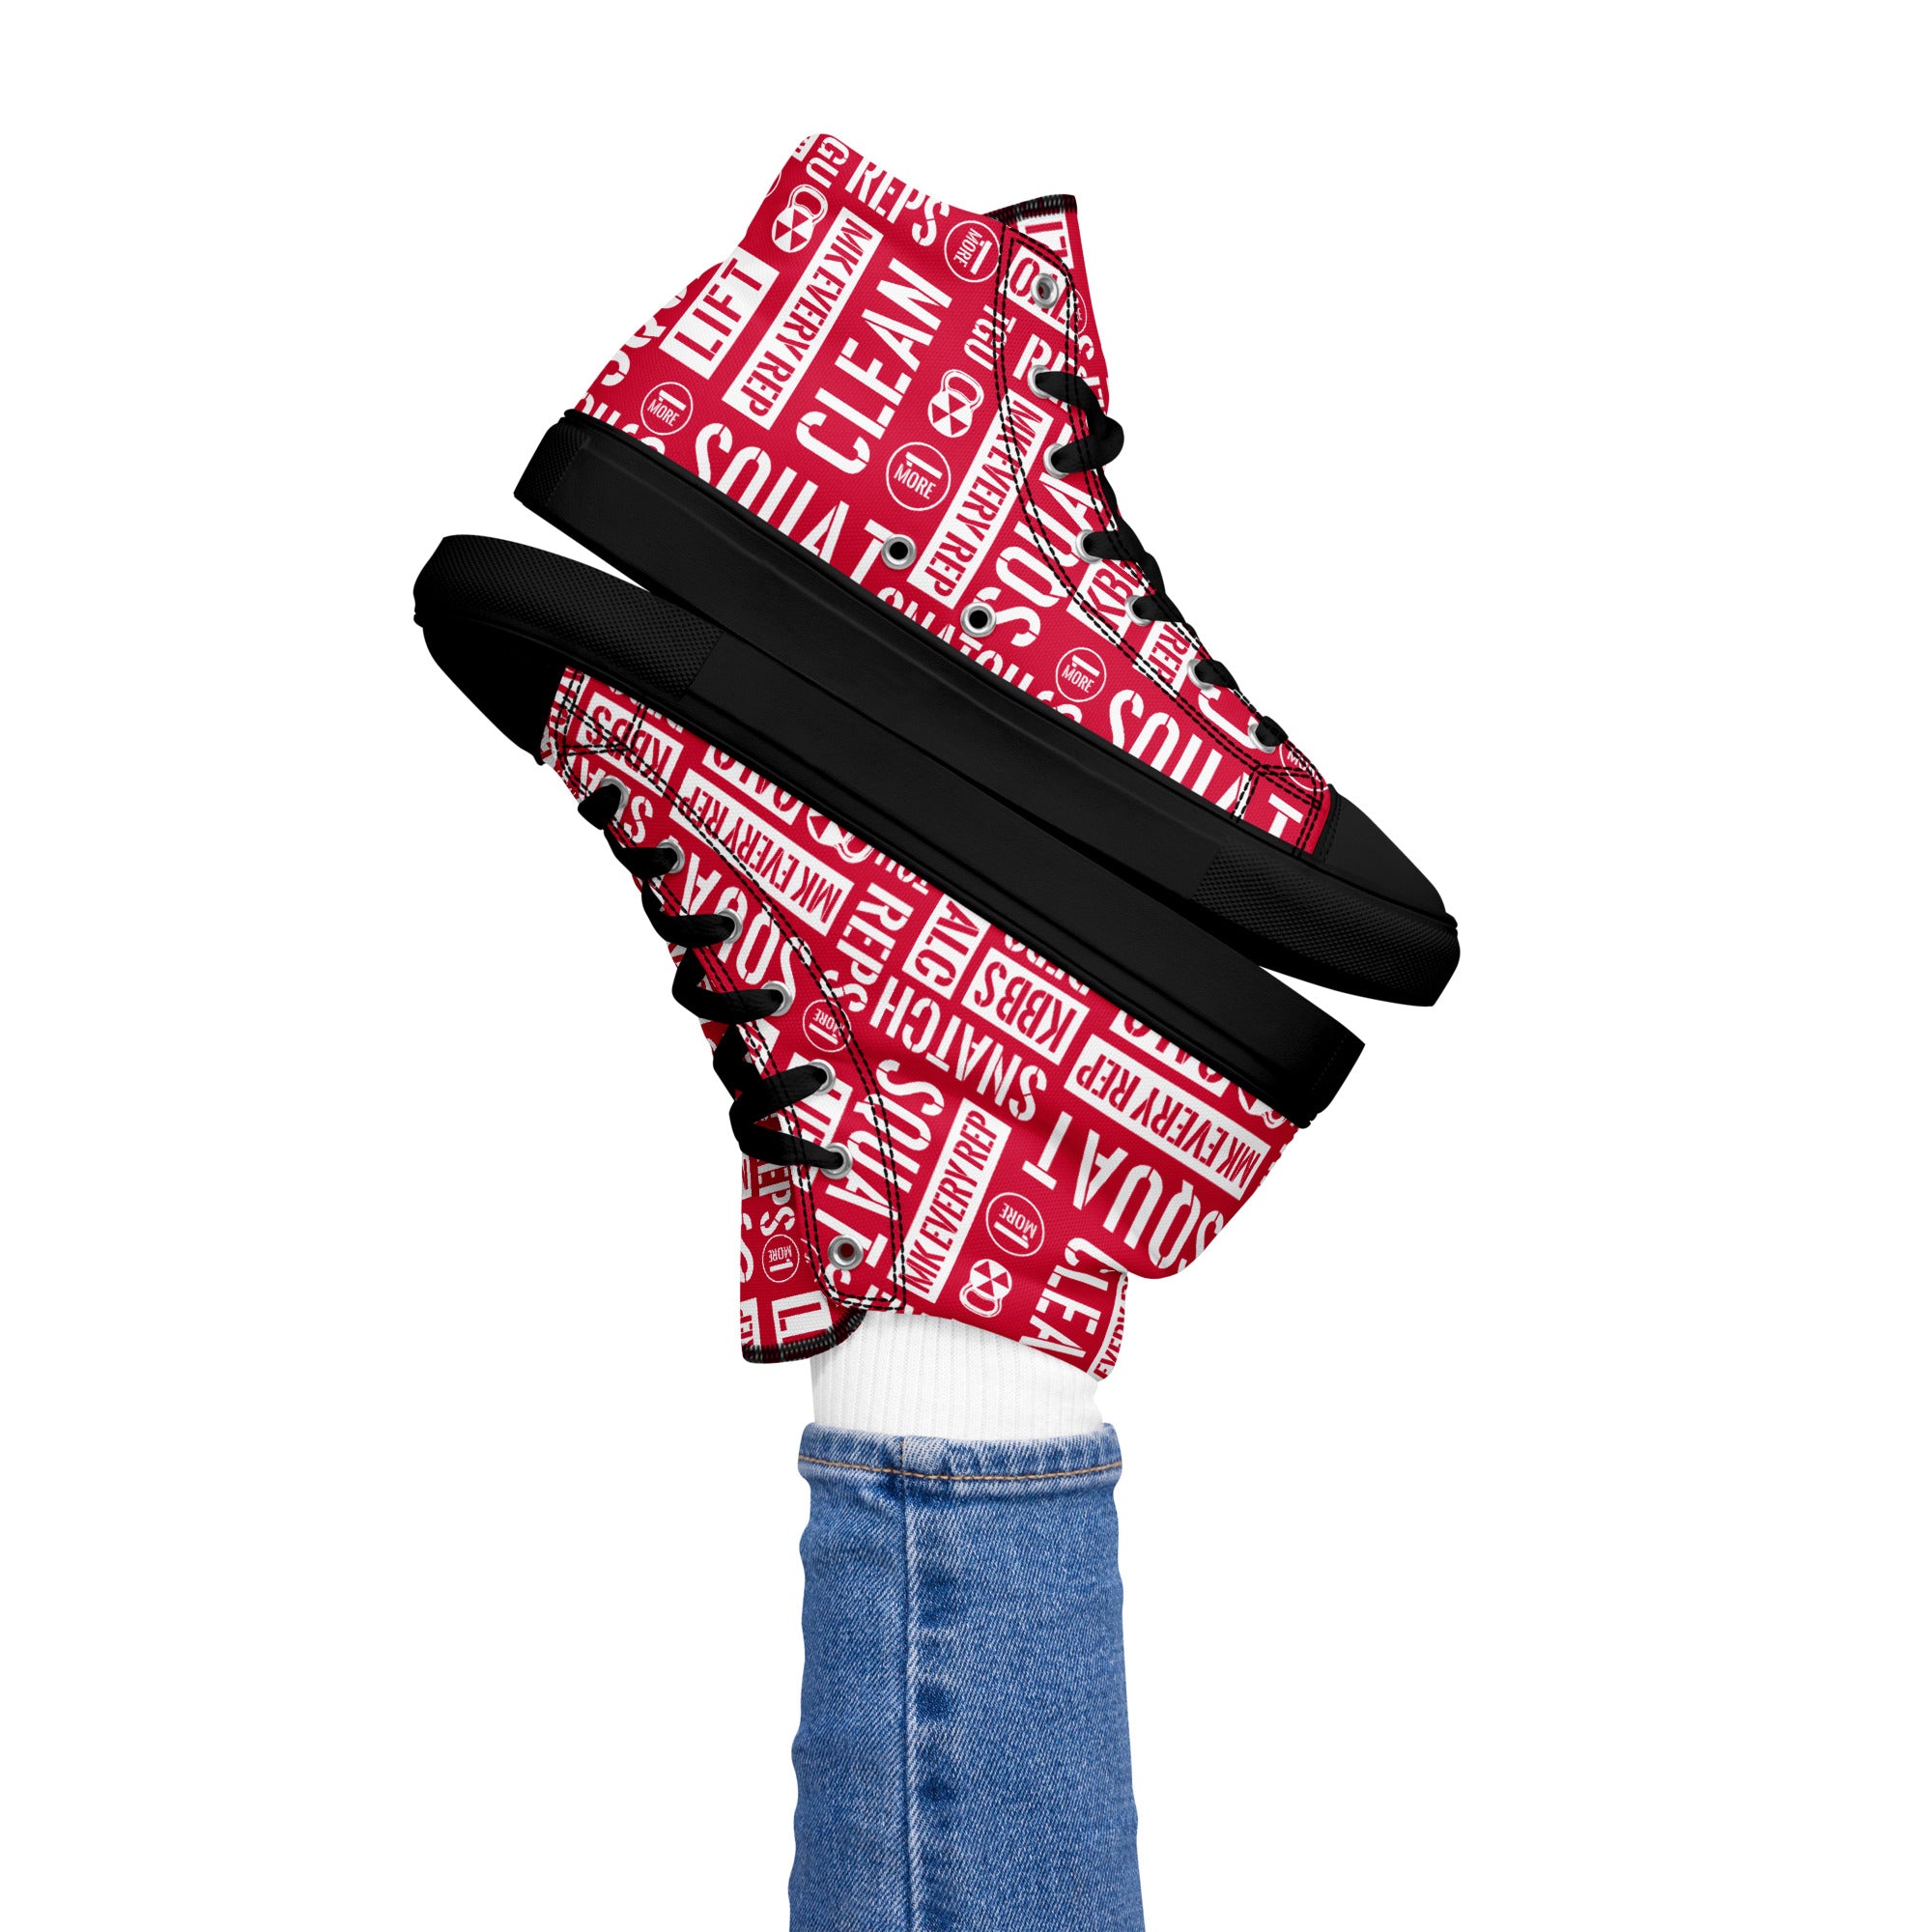 Crimson Red/White Acronyms Women’s High Tops